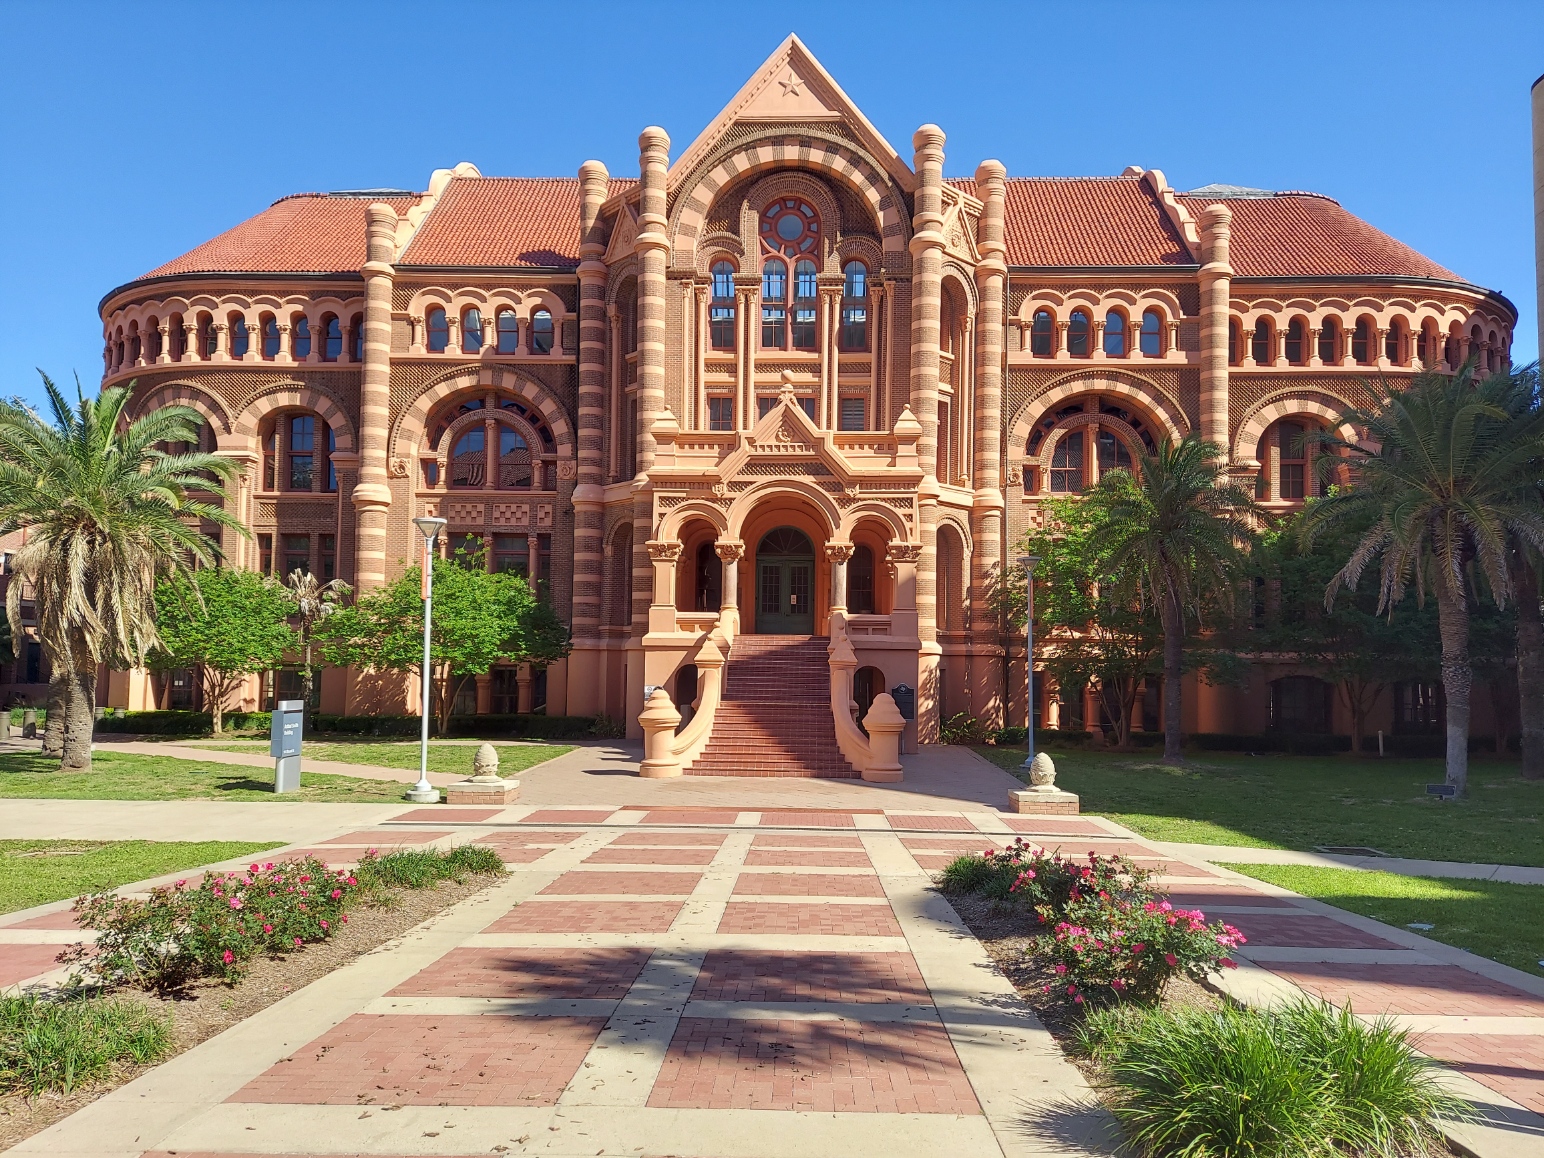 One of Galveston's most iconic structures 'old Red' on the campus of UTMB.